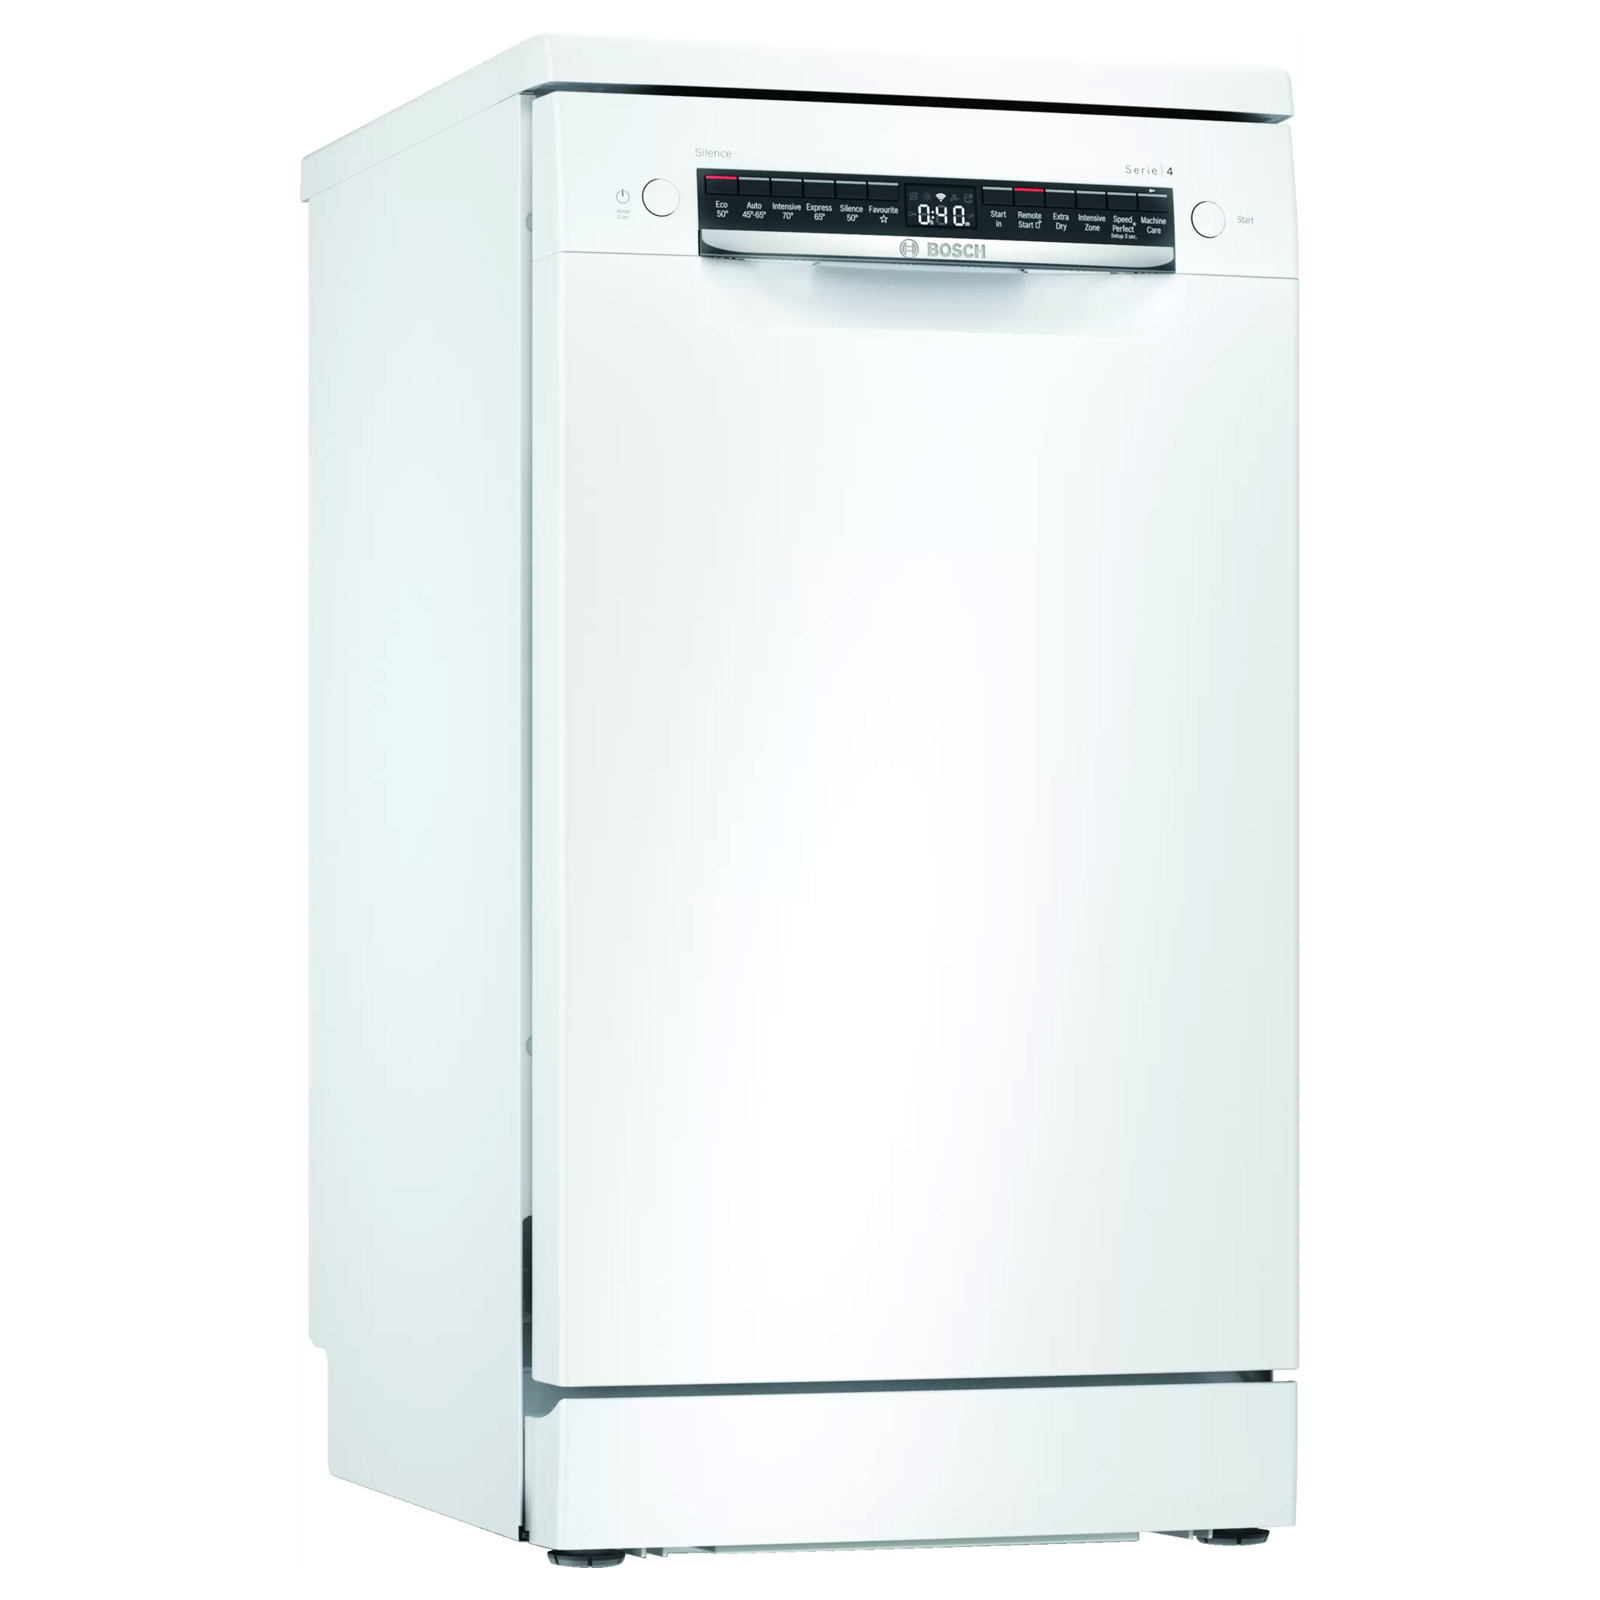 Image of Bosch SPS4HKW45G Series 4 45cm Dishwasher in White 9 Place Setting E